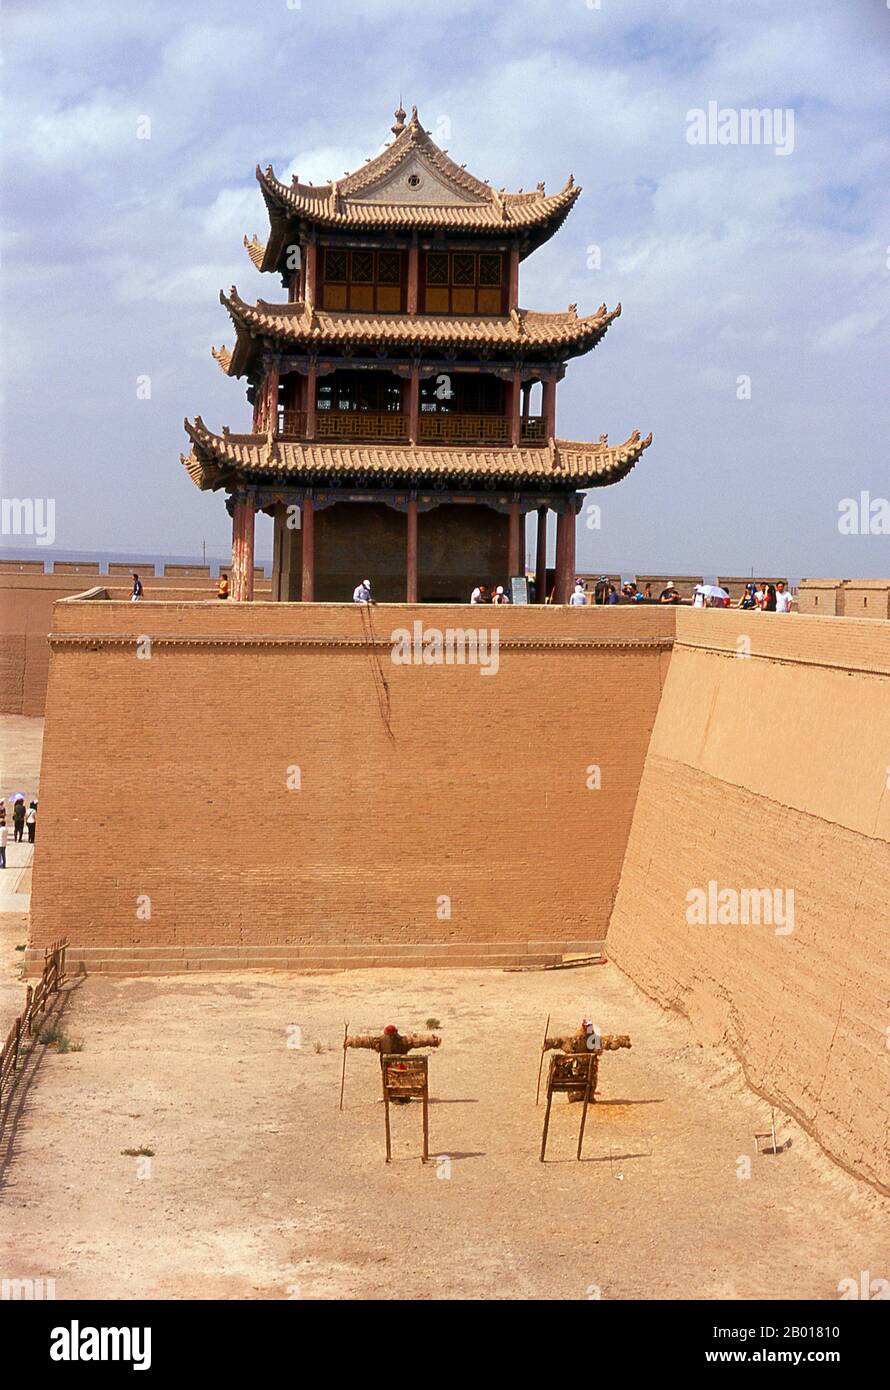 China: Jiayuguan Men (Gate of Sighs), Jiayuguan Fort, Jiayuguan, Gansu.  Jiayuguan, the ‘First and Greatest Pass under Heaven’, was completed in 1372 on the orders of Zhu Yuanzhang, the first Ming Emperor (1368-98), to mark the end of the Ming Great Wall. It was also the very limits of Chinese civilisation, and the beginnings of the outer ‘barbarian’ lands.  For centuries the fort was not just of strategic importance to Han Chinese, but of cultural significance as well. This was the last civilised place before the outer darkness, those proceeding beyond facing a life of exile among nomads. Stock Photo